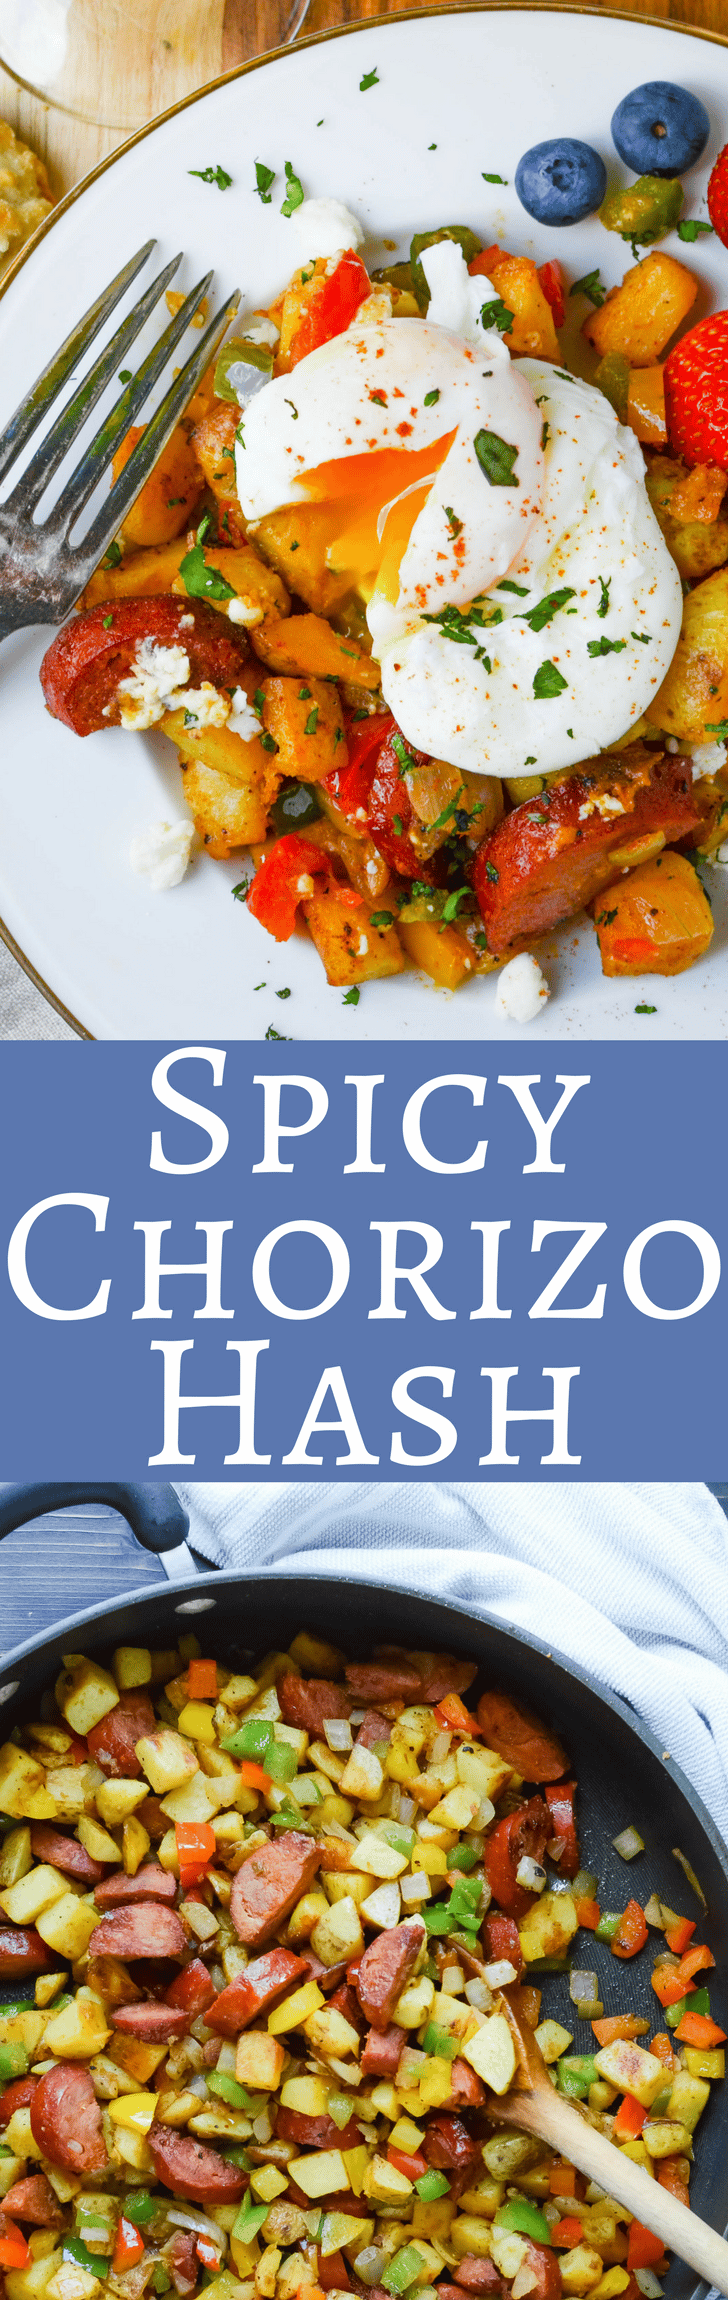 This easy, delicious recipe for Spicy Chorizo Hash is perfect for a weekend breakfast or brunch! Top it with poached or fried eggs for the ultimate hearty meal! #CelebrateAllSummer #CollectiveBias #Ad